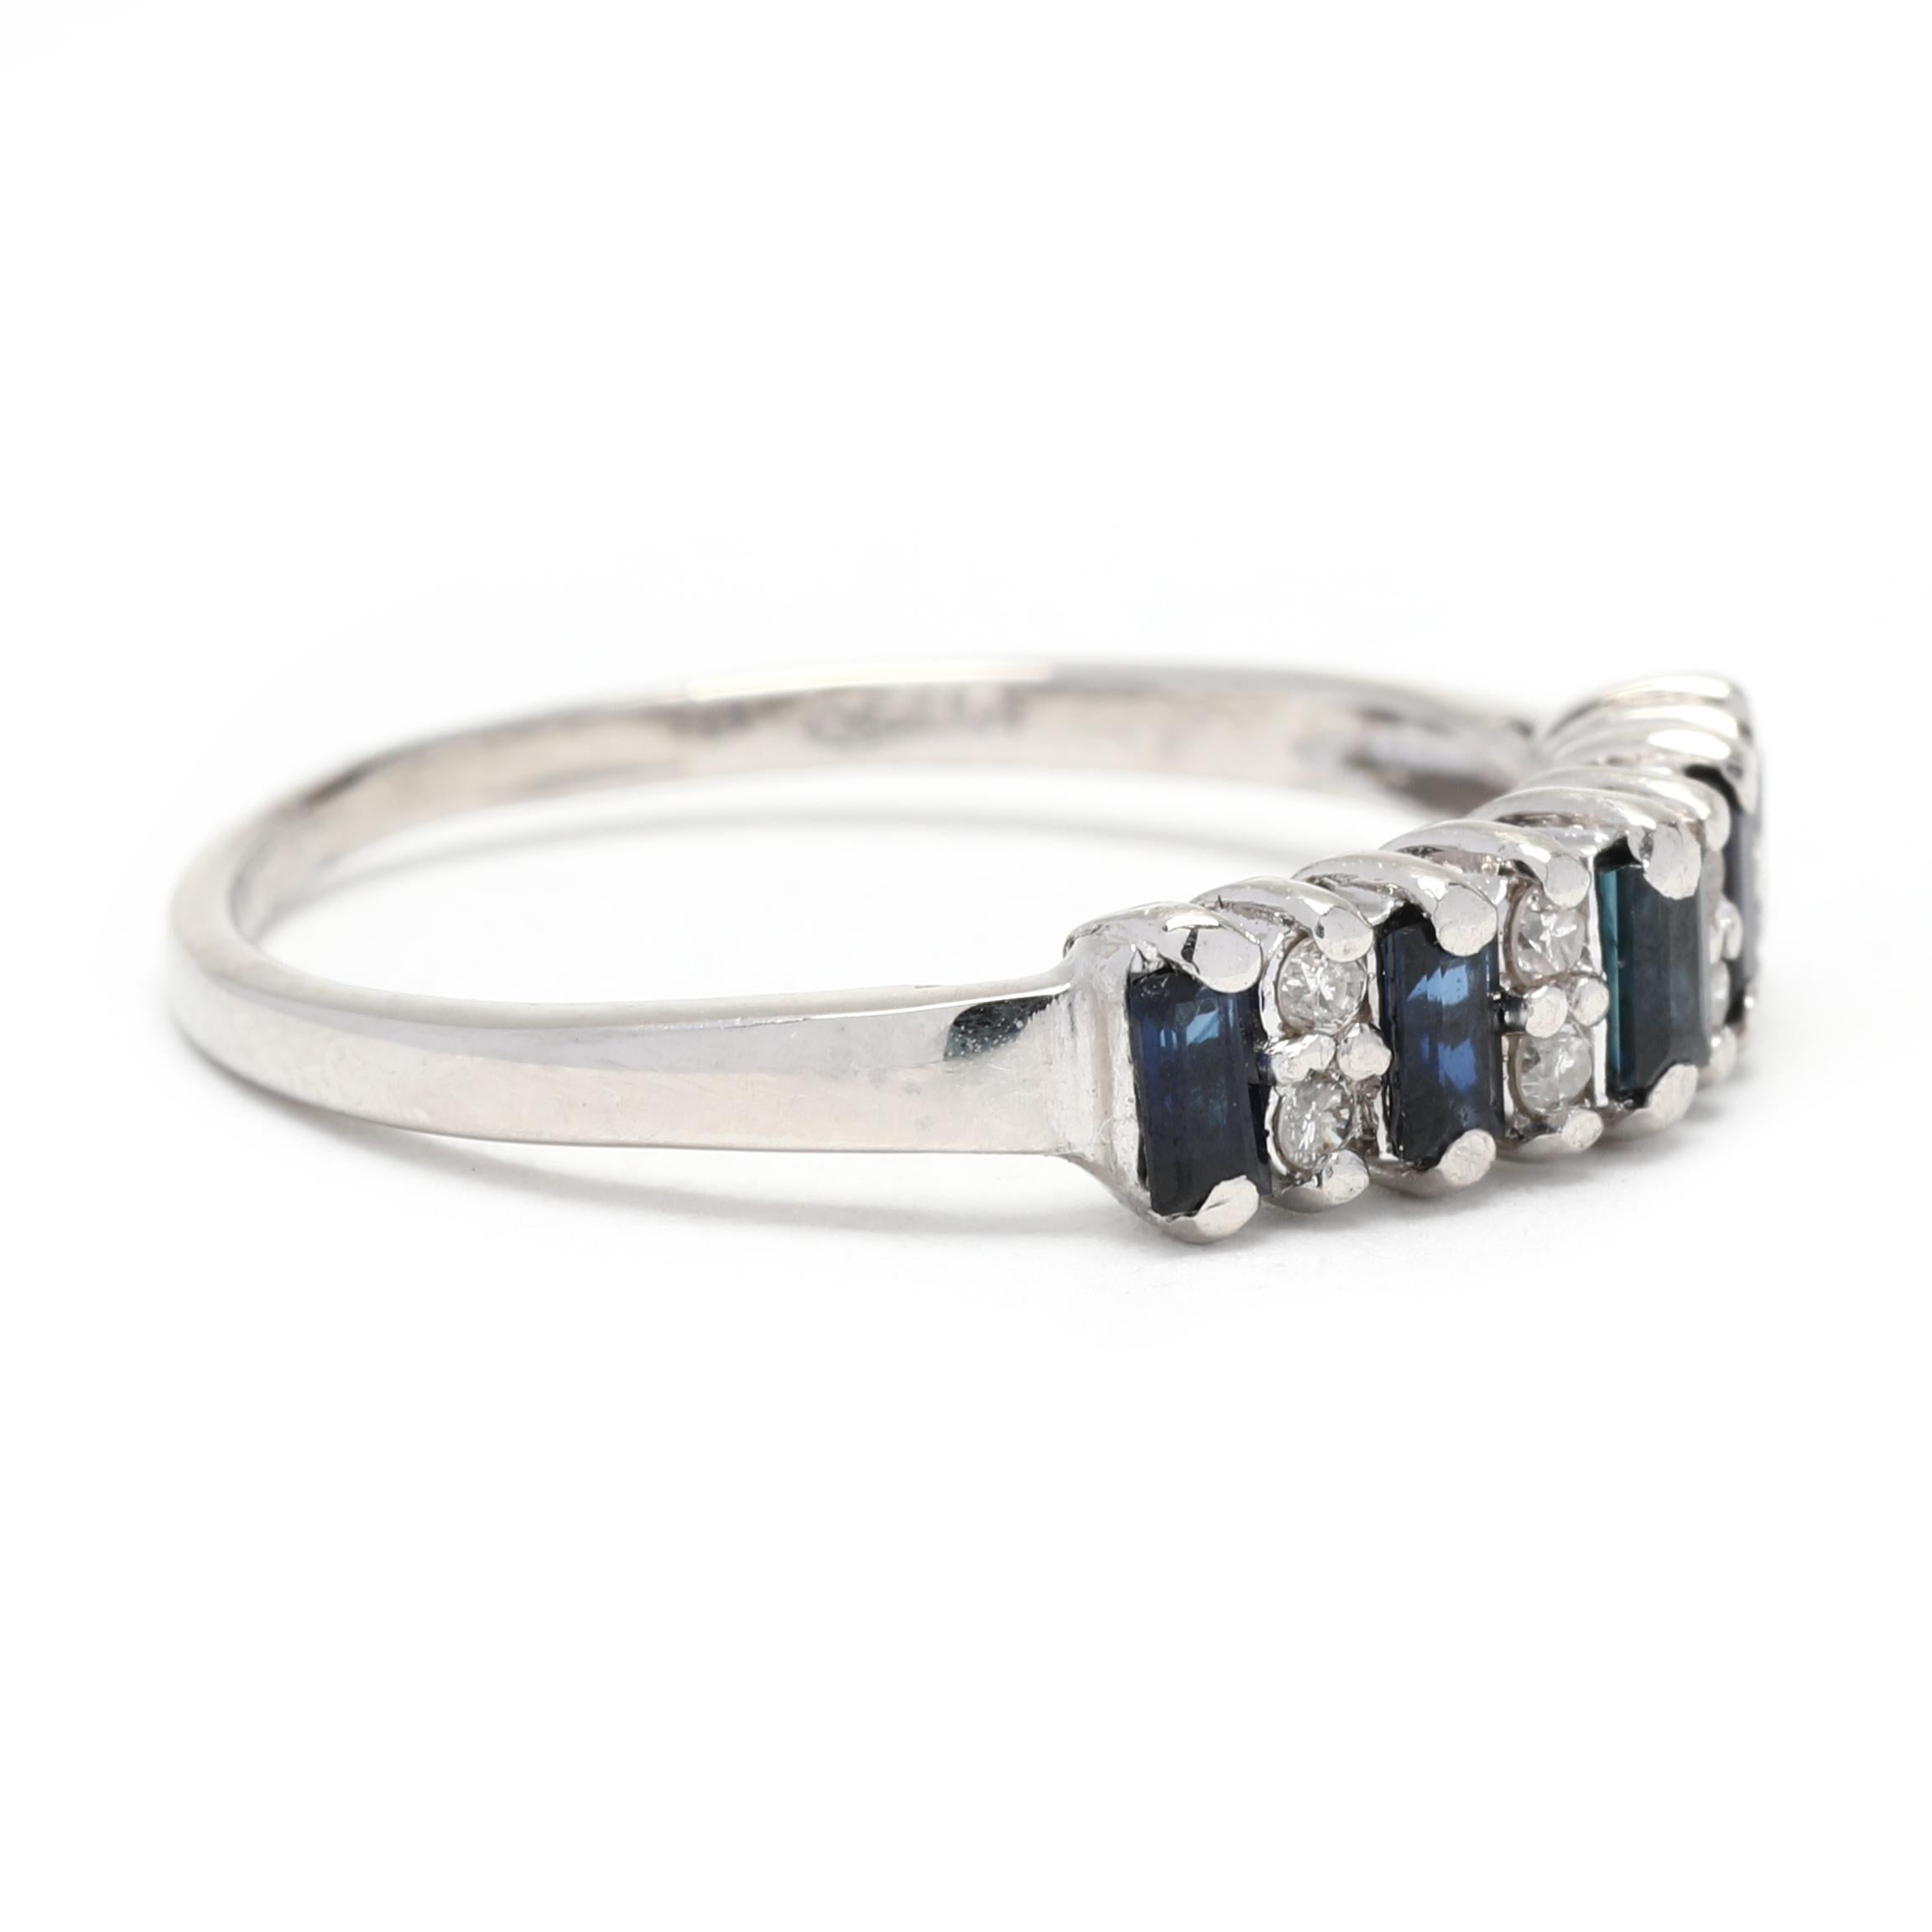 This beautiful sapphire diamond wedding band is made with 0.50ctw of genuine sapphires and diamonds, expertly set in a stackable design of platinum. Its delicate and timeless design makes it perfect for wedding celebrations or daily use. This